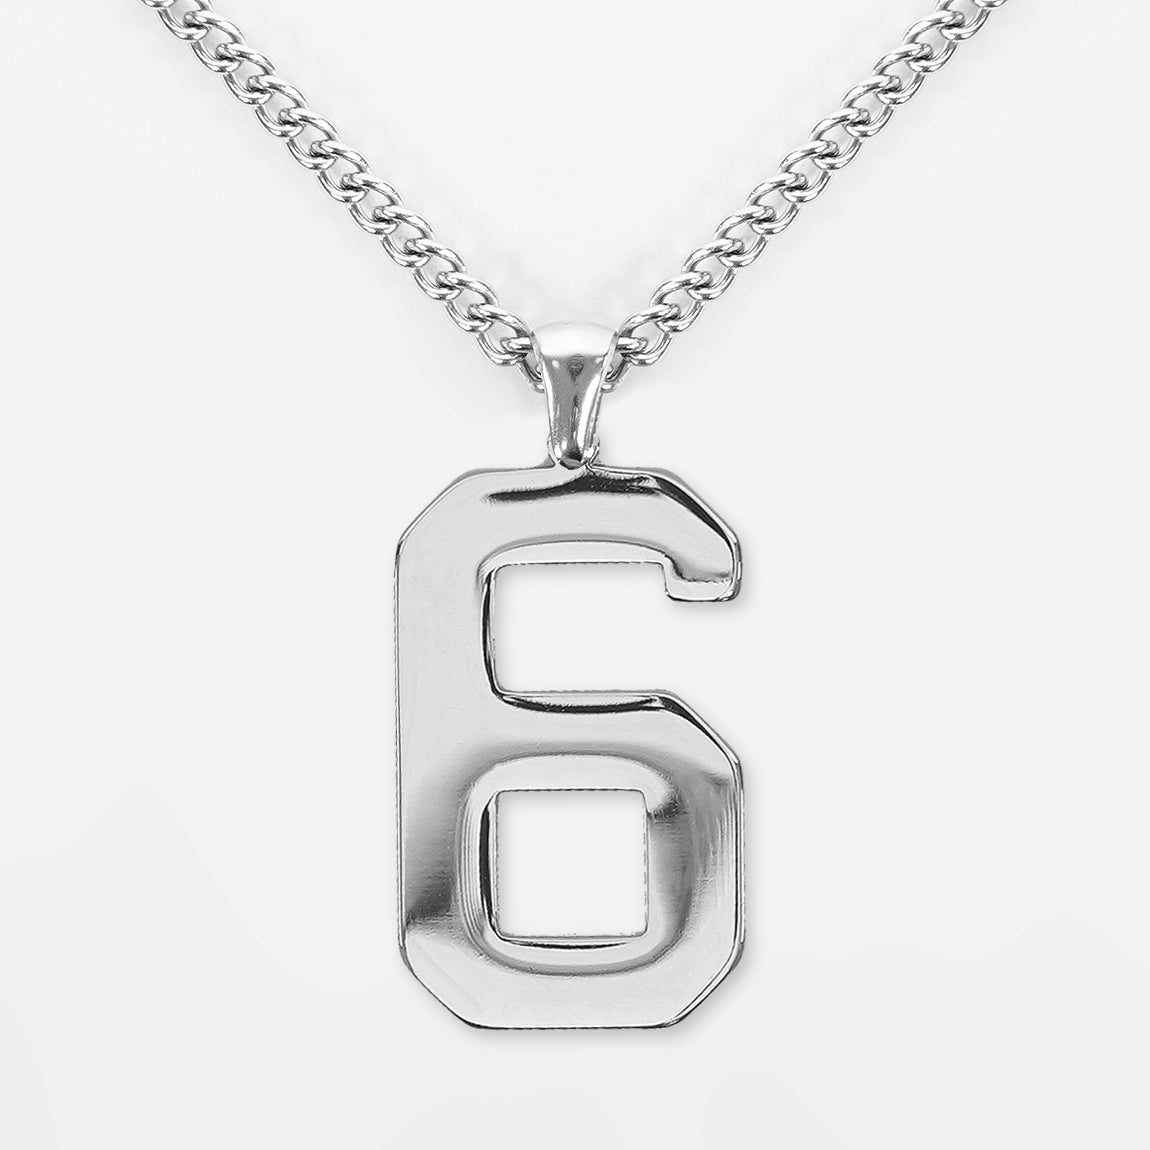 6 Number Pendant with Chain Necklace - Stainless Steel